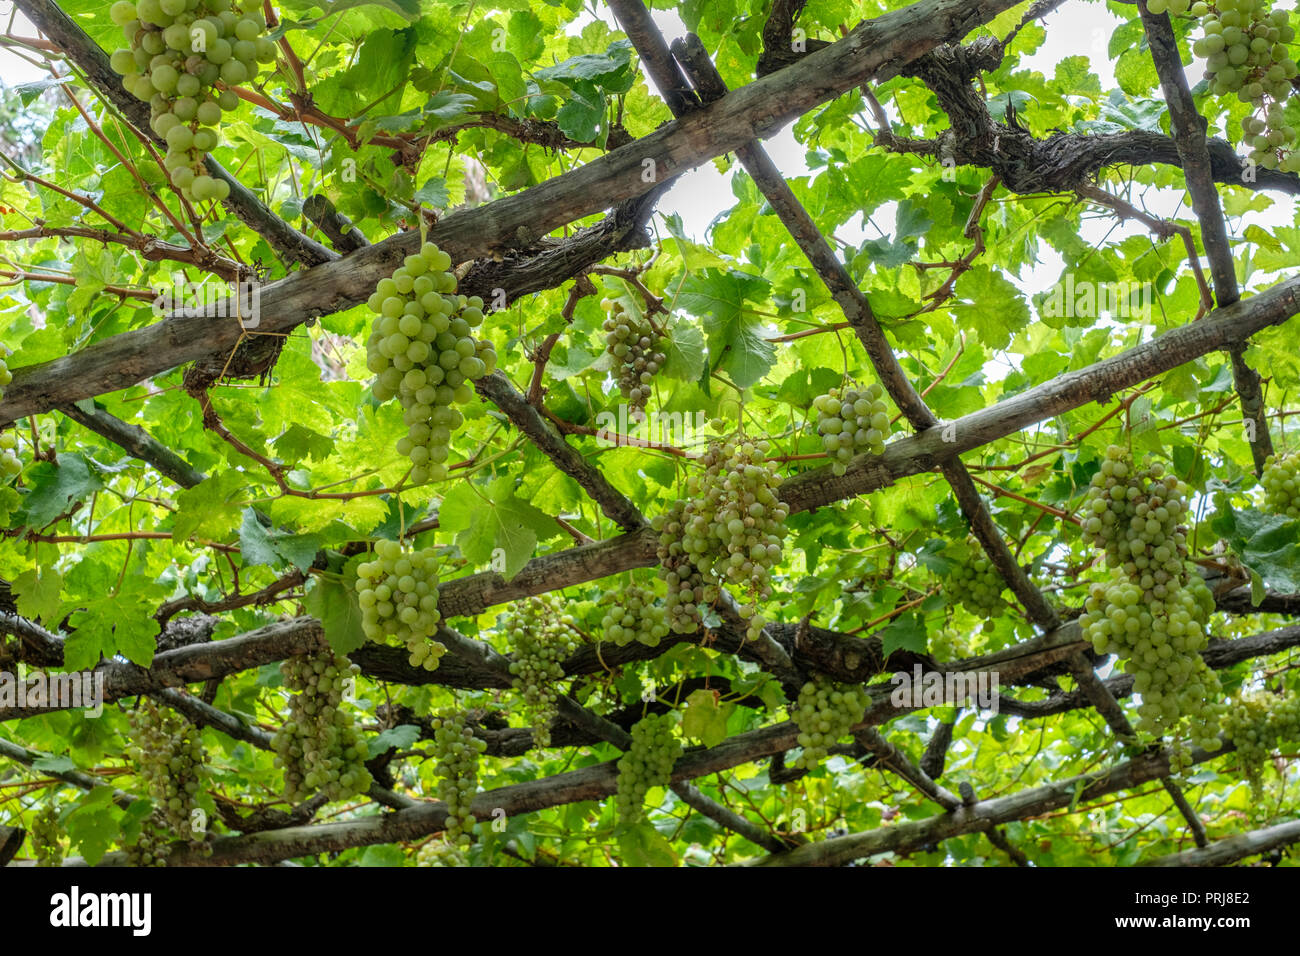 Bunch of grapes on vine / grapevine hanging on wooden beams Stock Photo